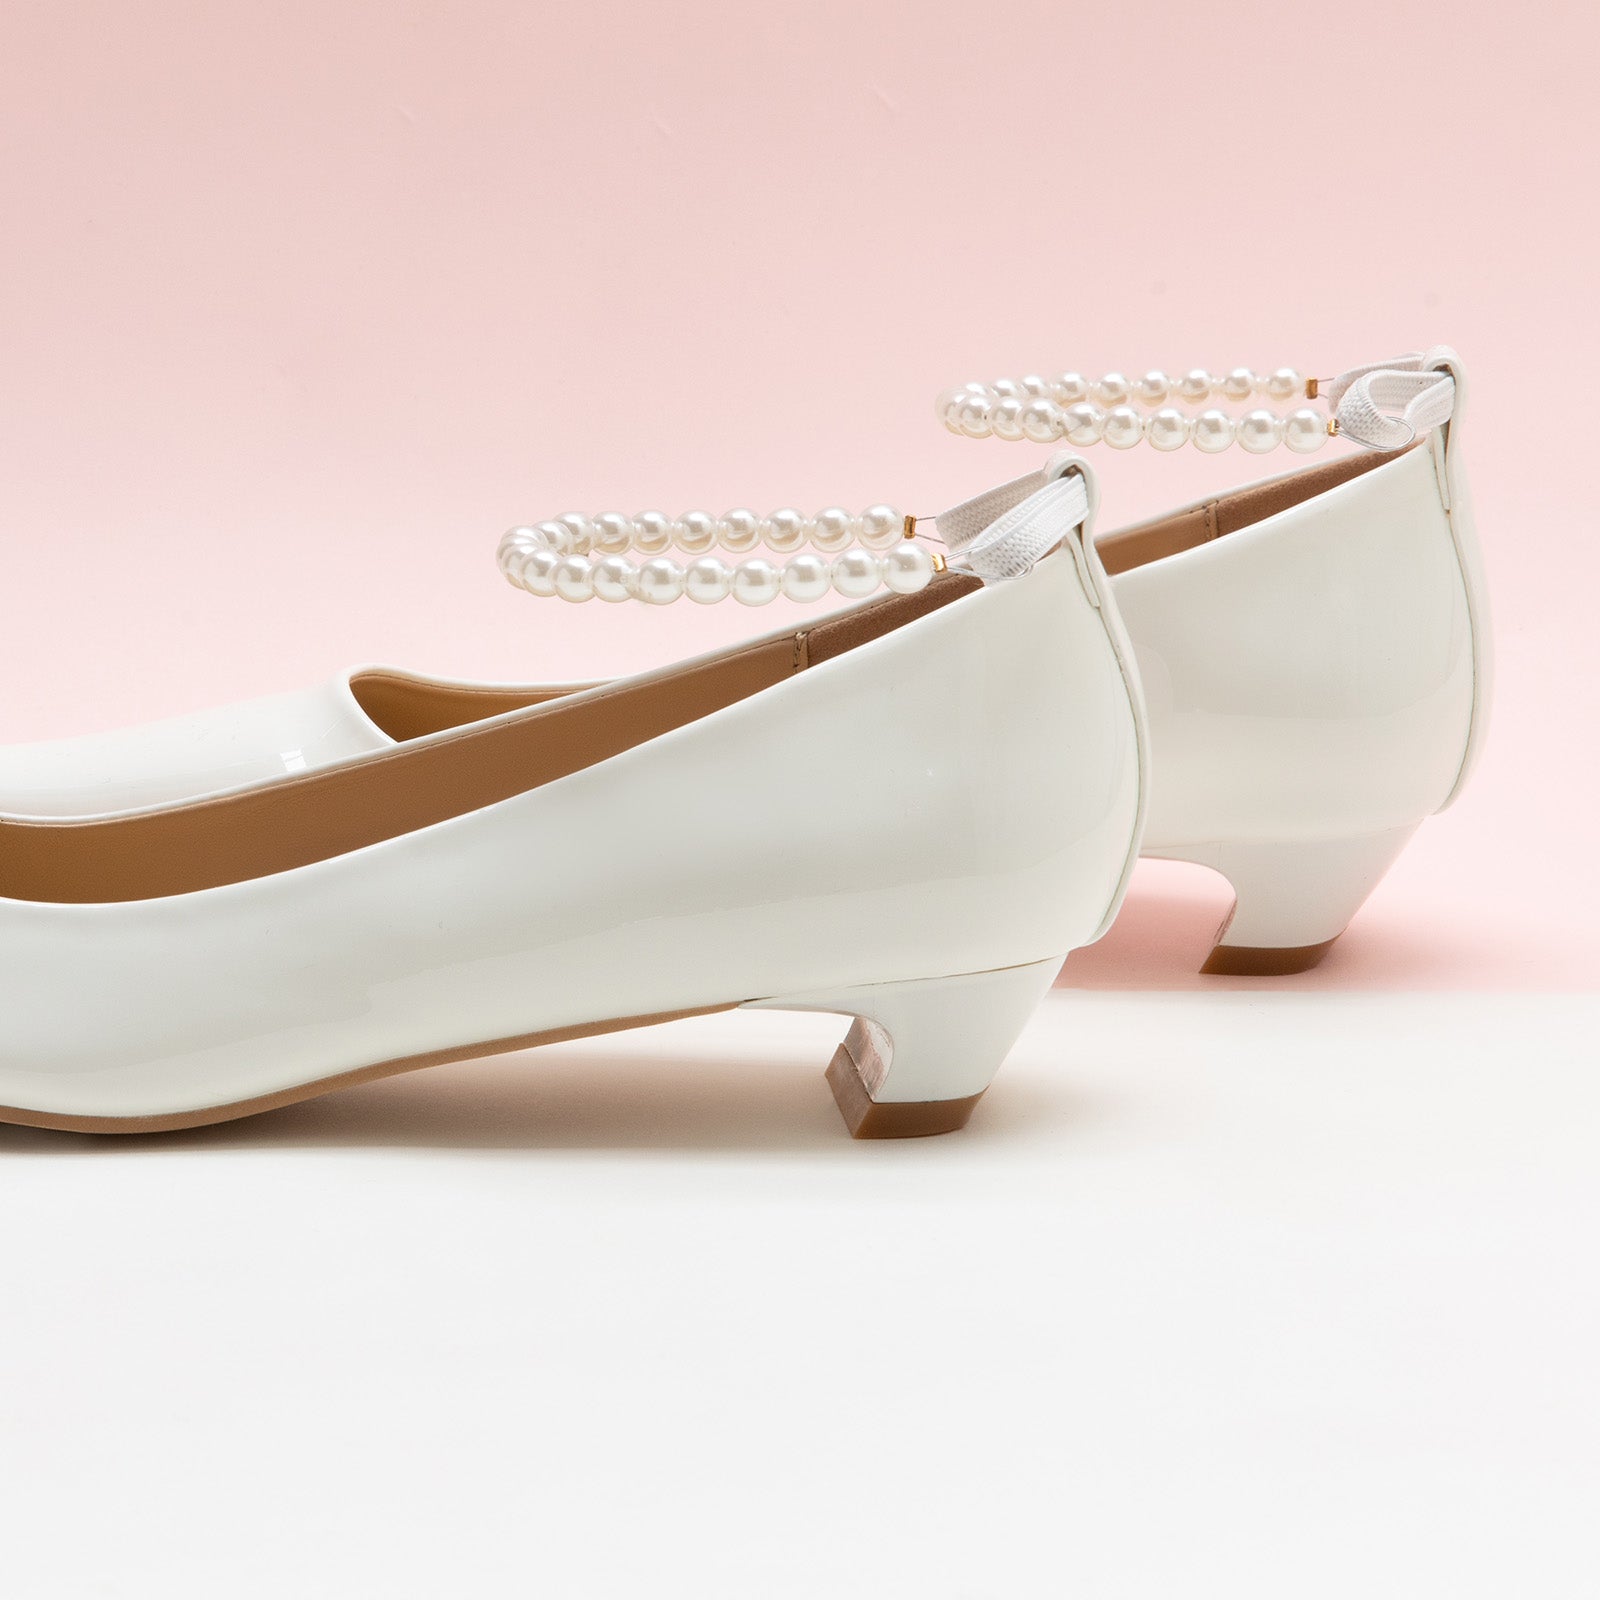 Winter Wonderland: Pearl Straps Low Heel in White, featuring delicate pearl details for a classic and refined style